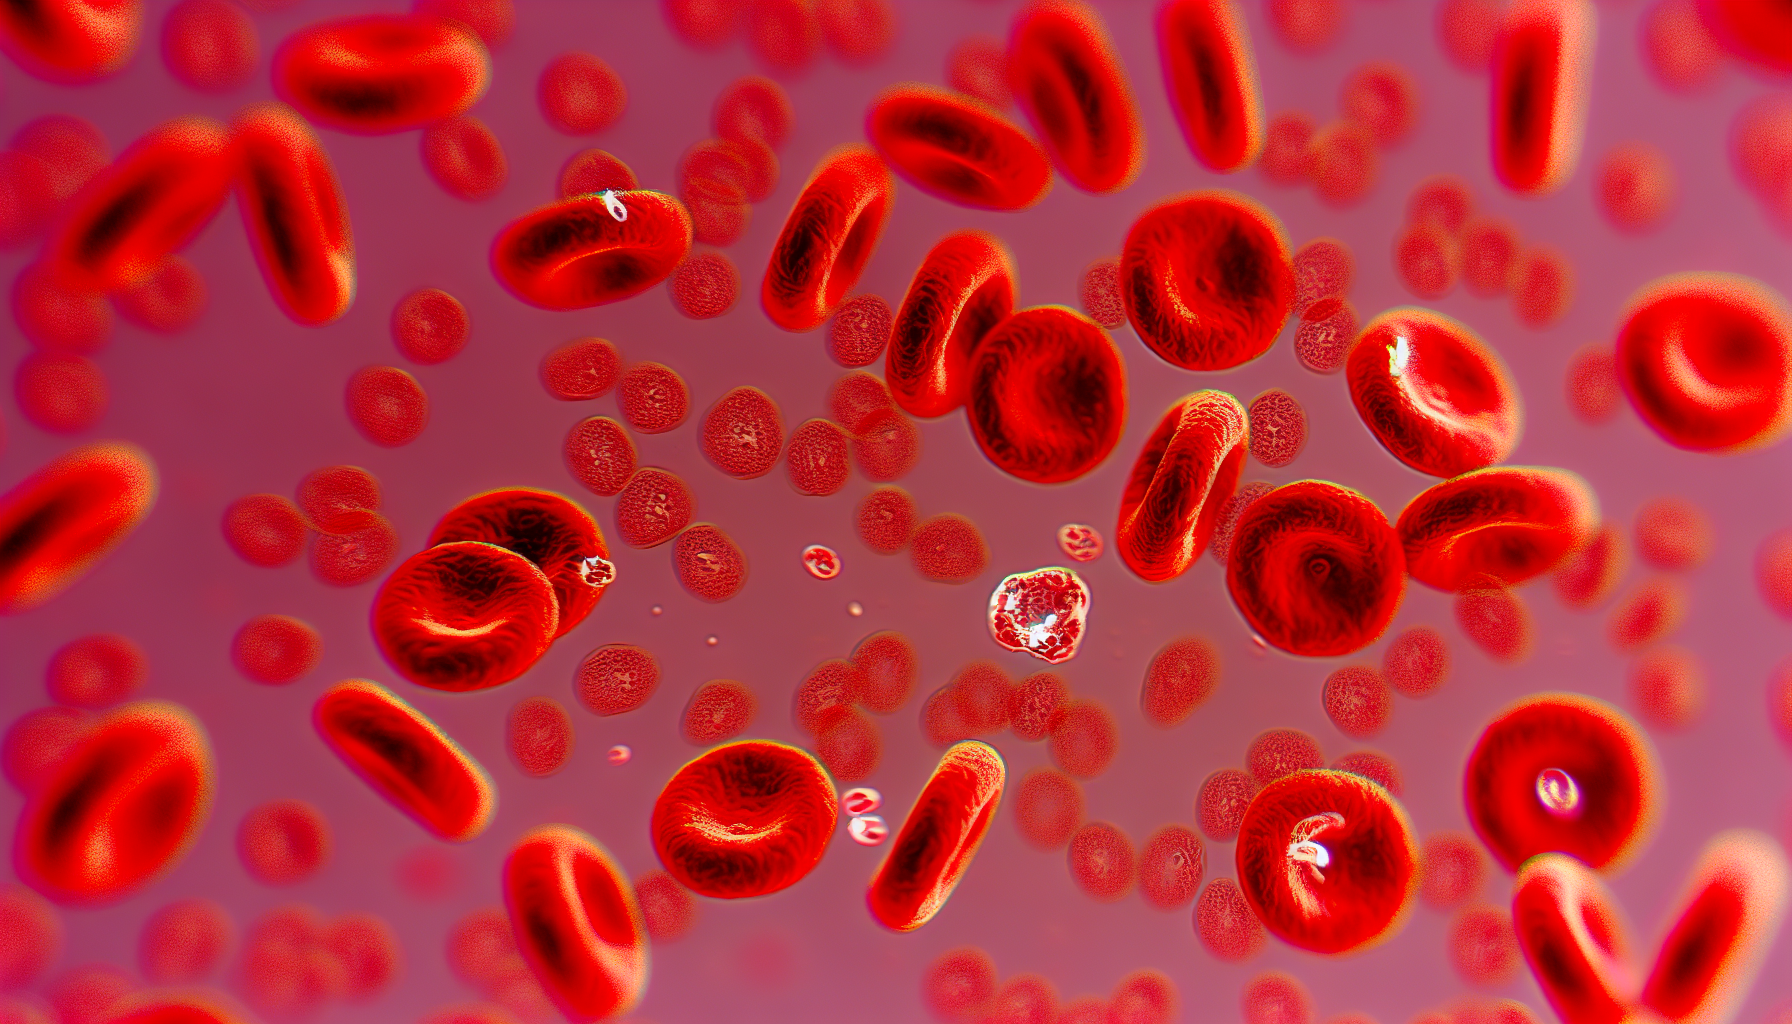 Red blood cells in isotonic solution